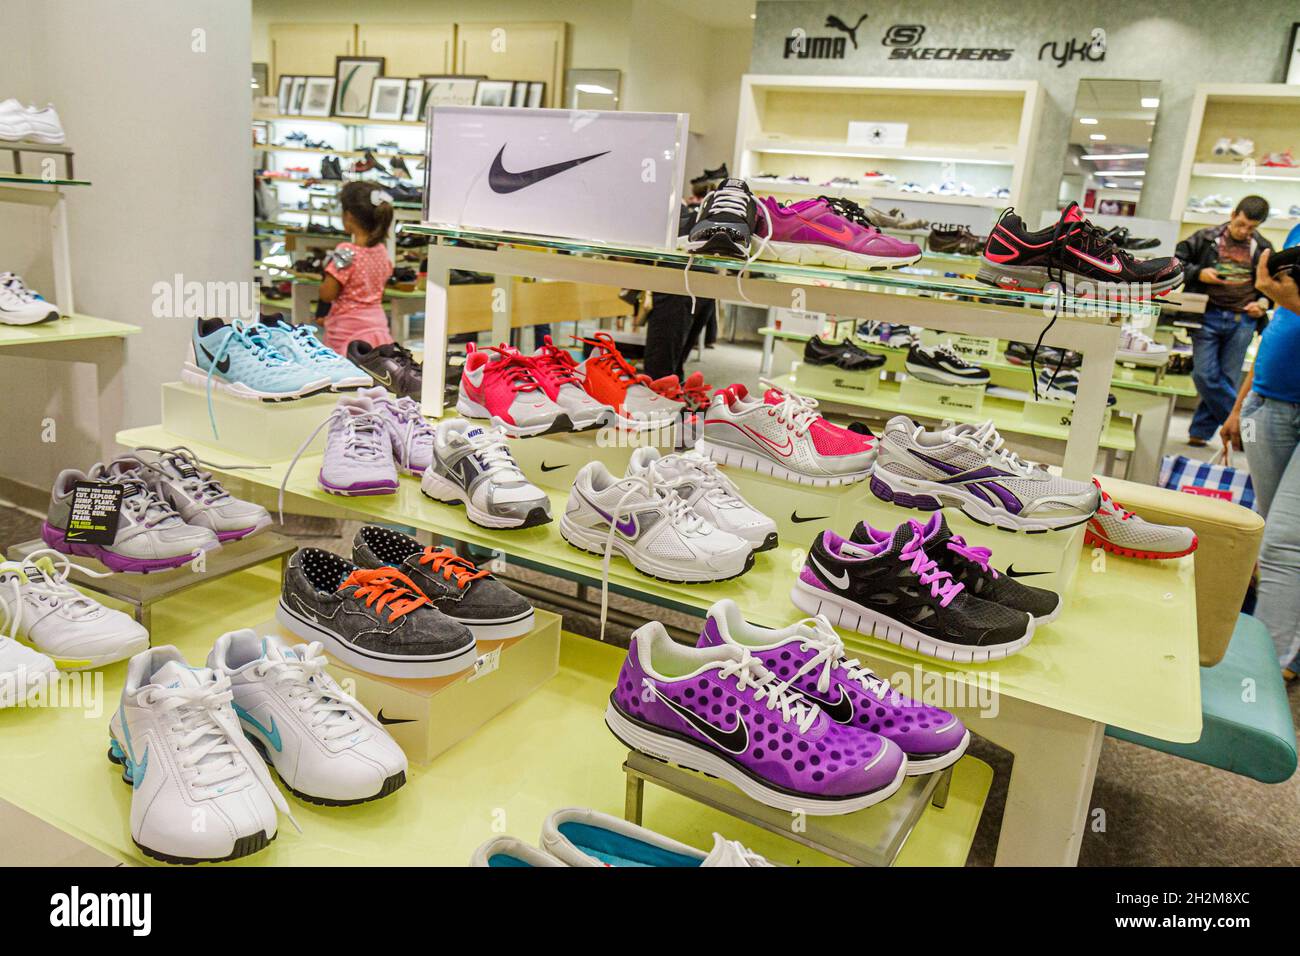 Nike Display High Resolution Stock Photography and Images - Alamy